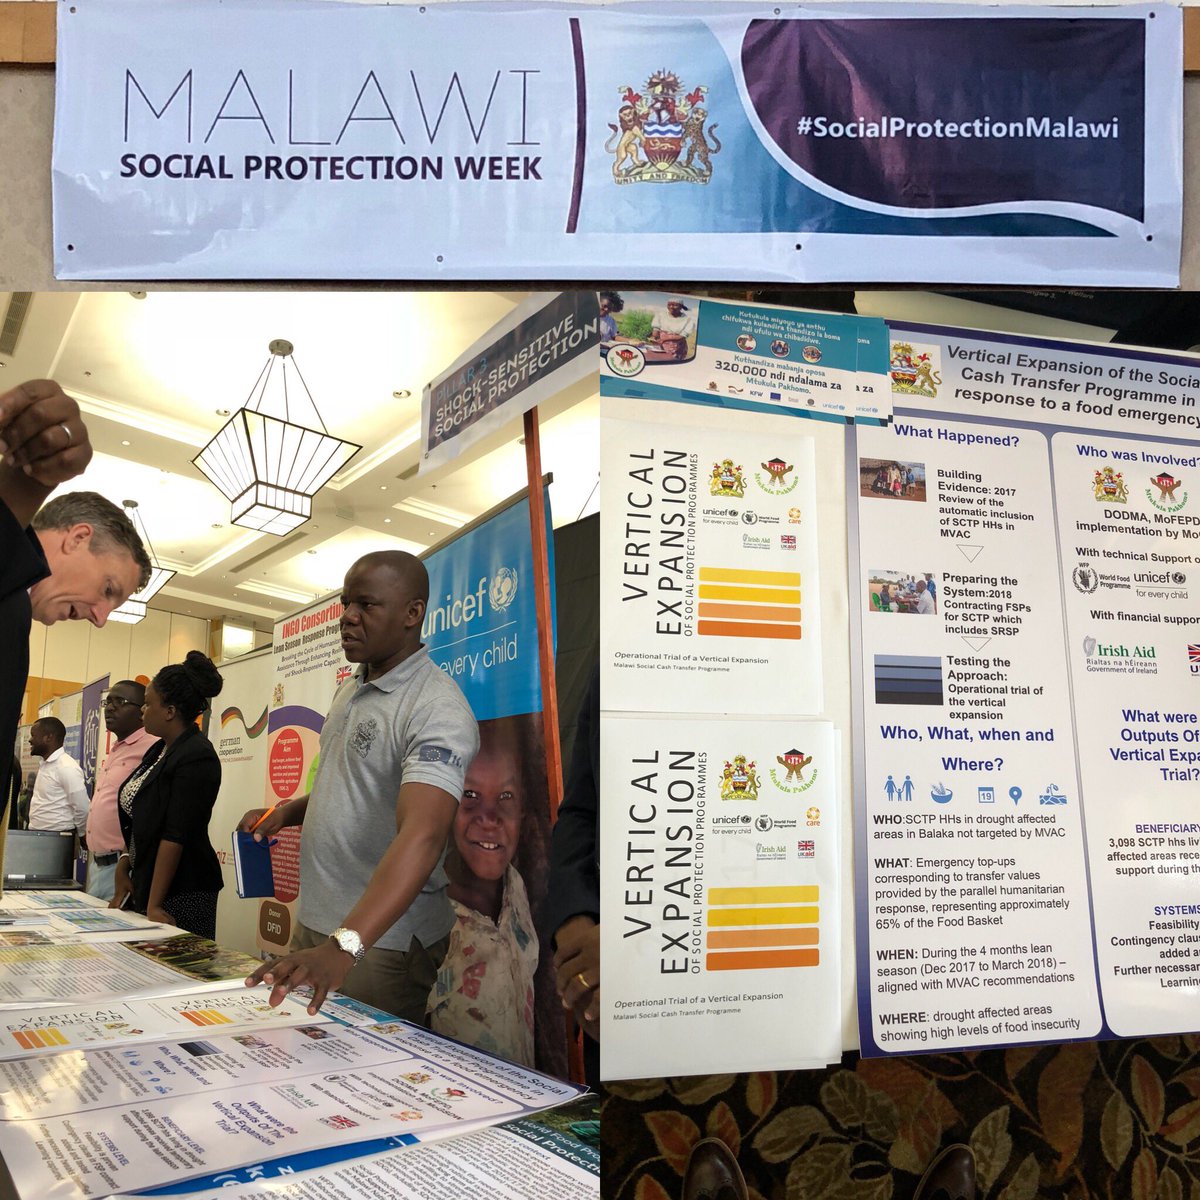 (Live!) Providing humanitarian better and faster - The Government of #Malawi sharing the learnings from the operational trial of the Vertical Expansion of the Social Cash Transfer Programme during the #SocialProtection week #SocialProtectionMalawi #UnicefMalawi #shockresponsive